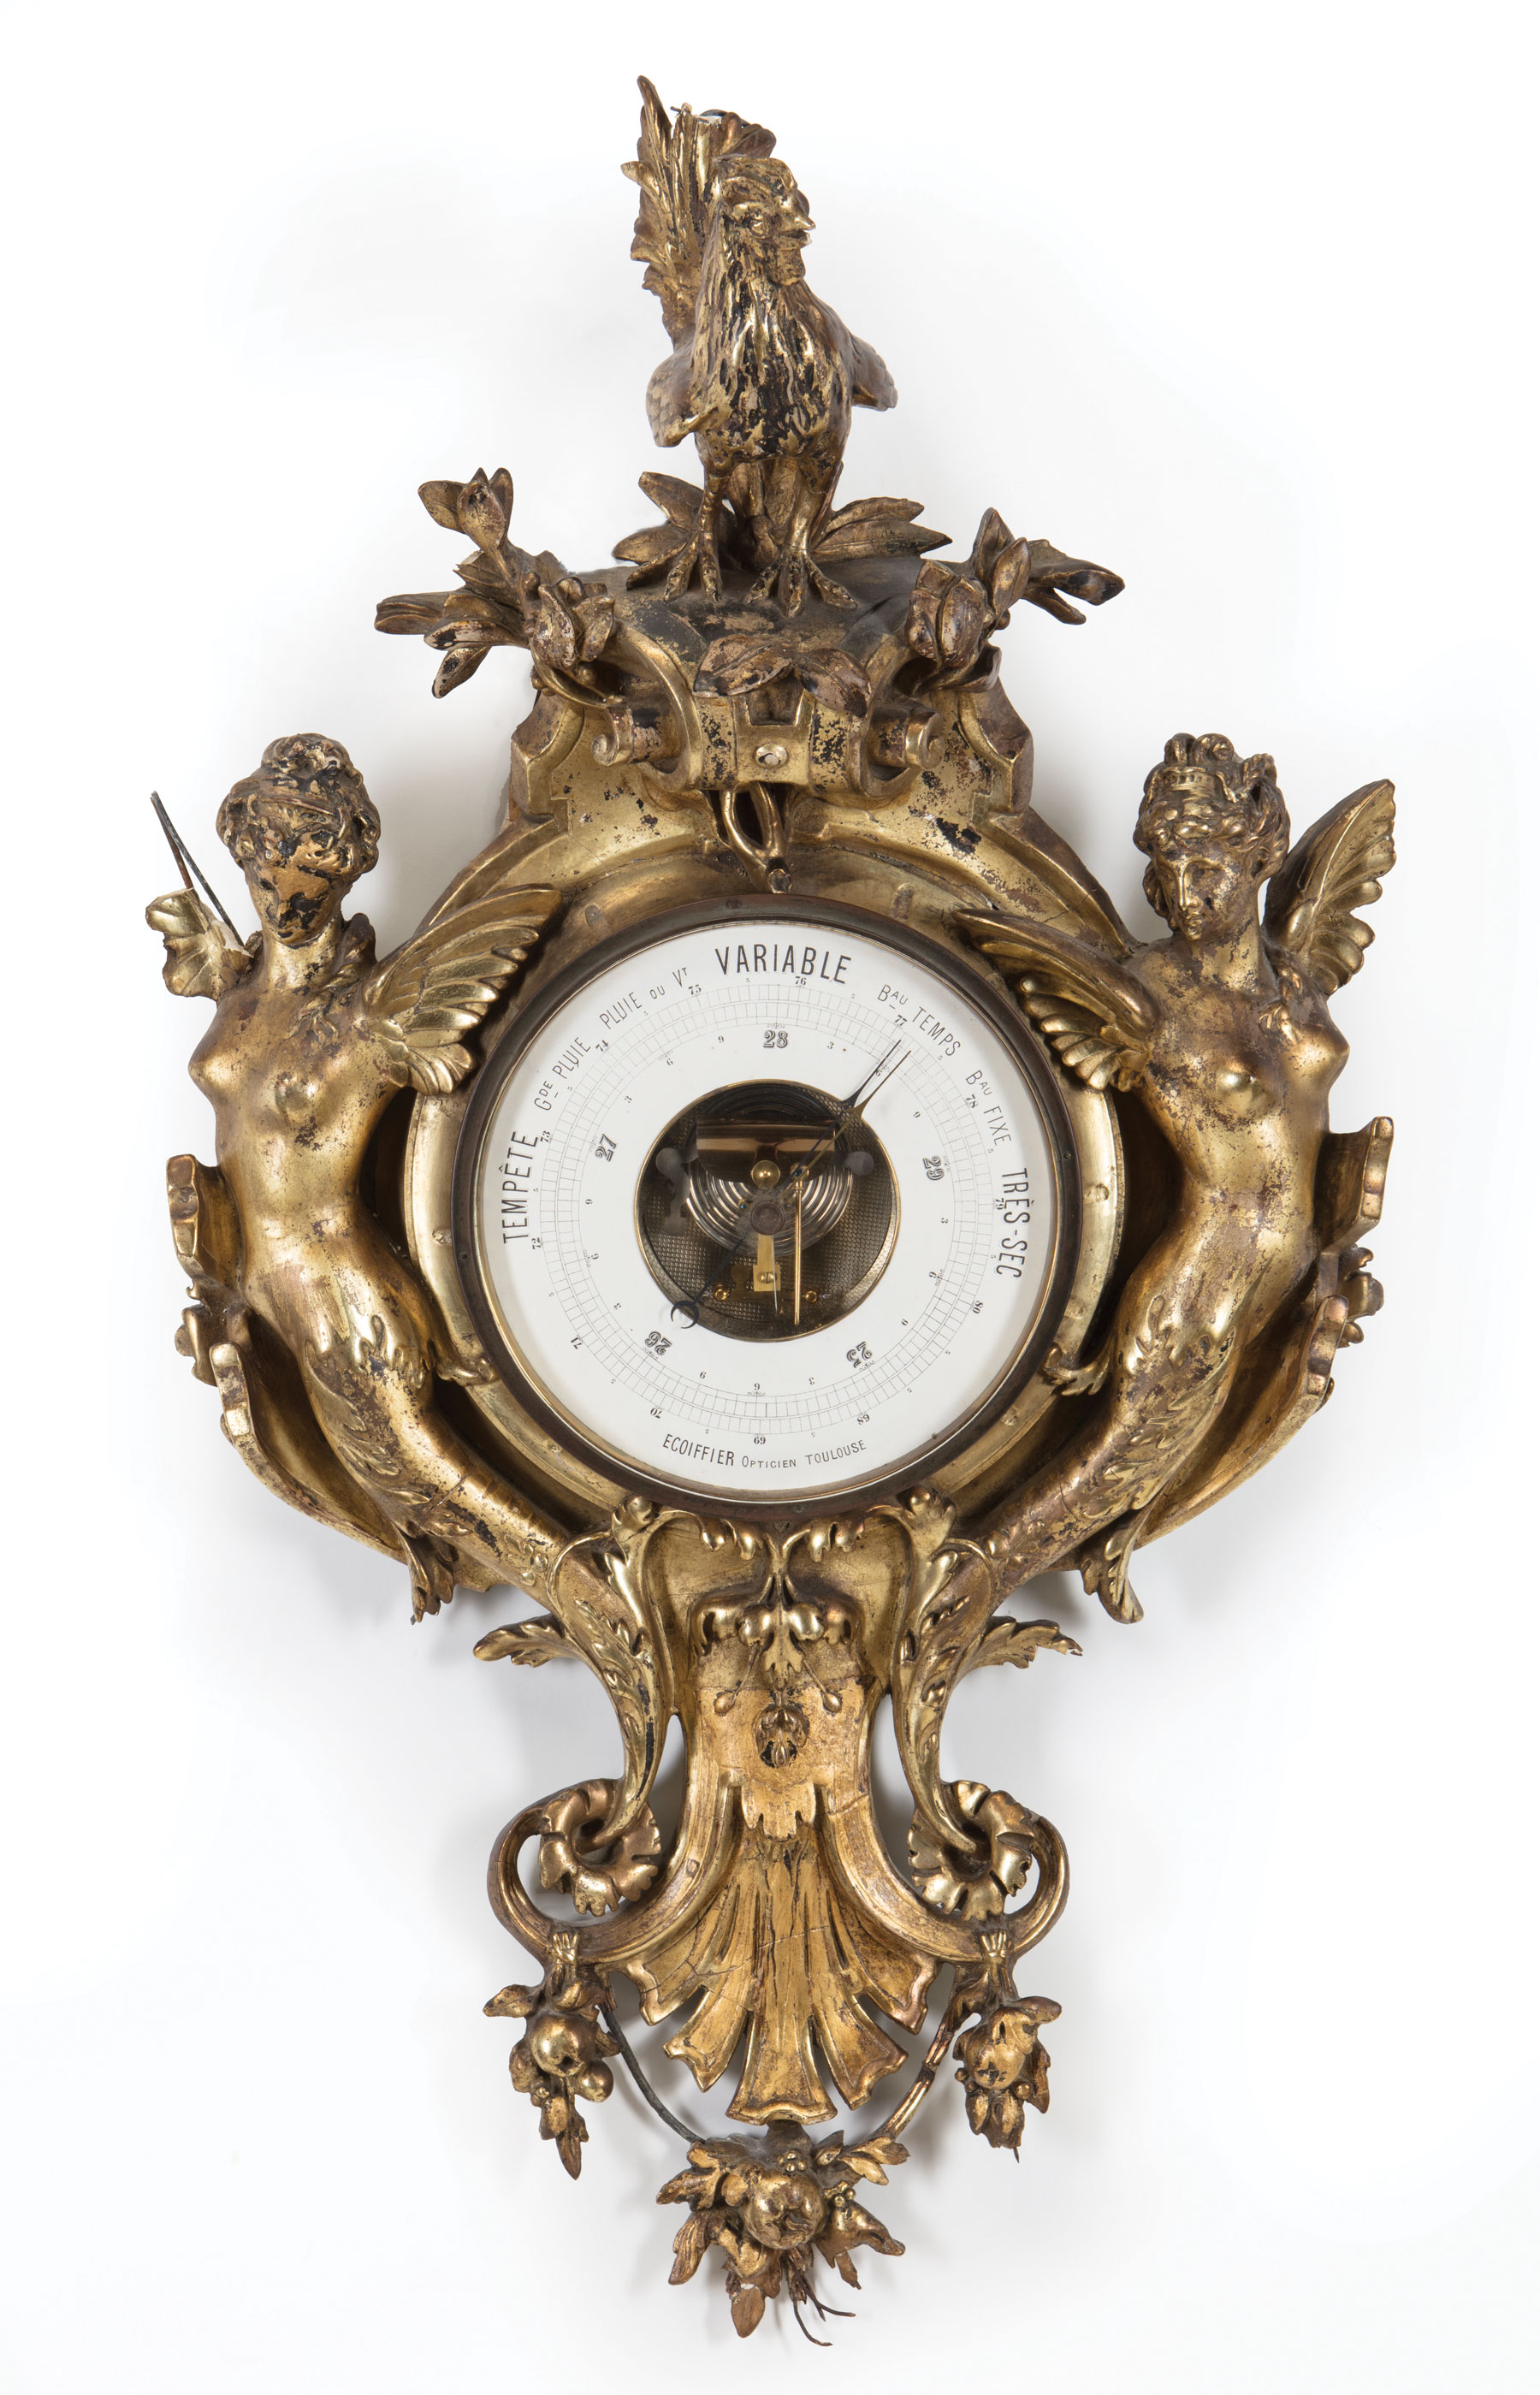 Large Antique Gilt Barometer , late 19th c., surmounted by "Le Coq Gaulois", dial marked "